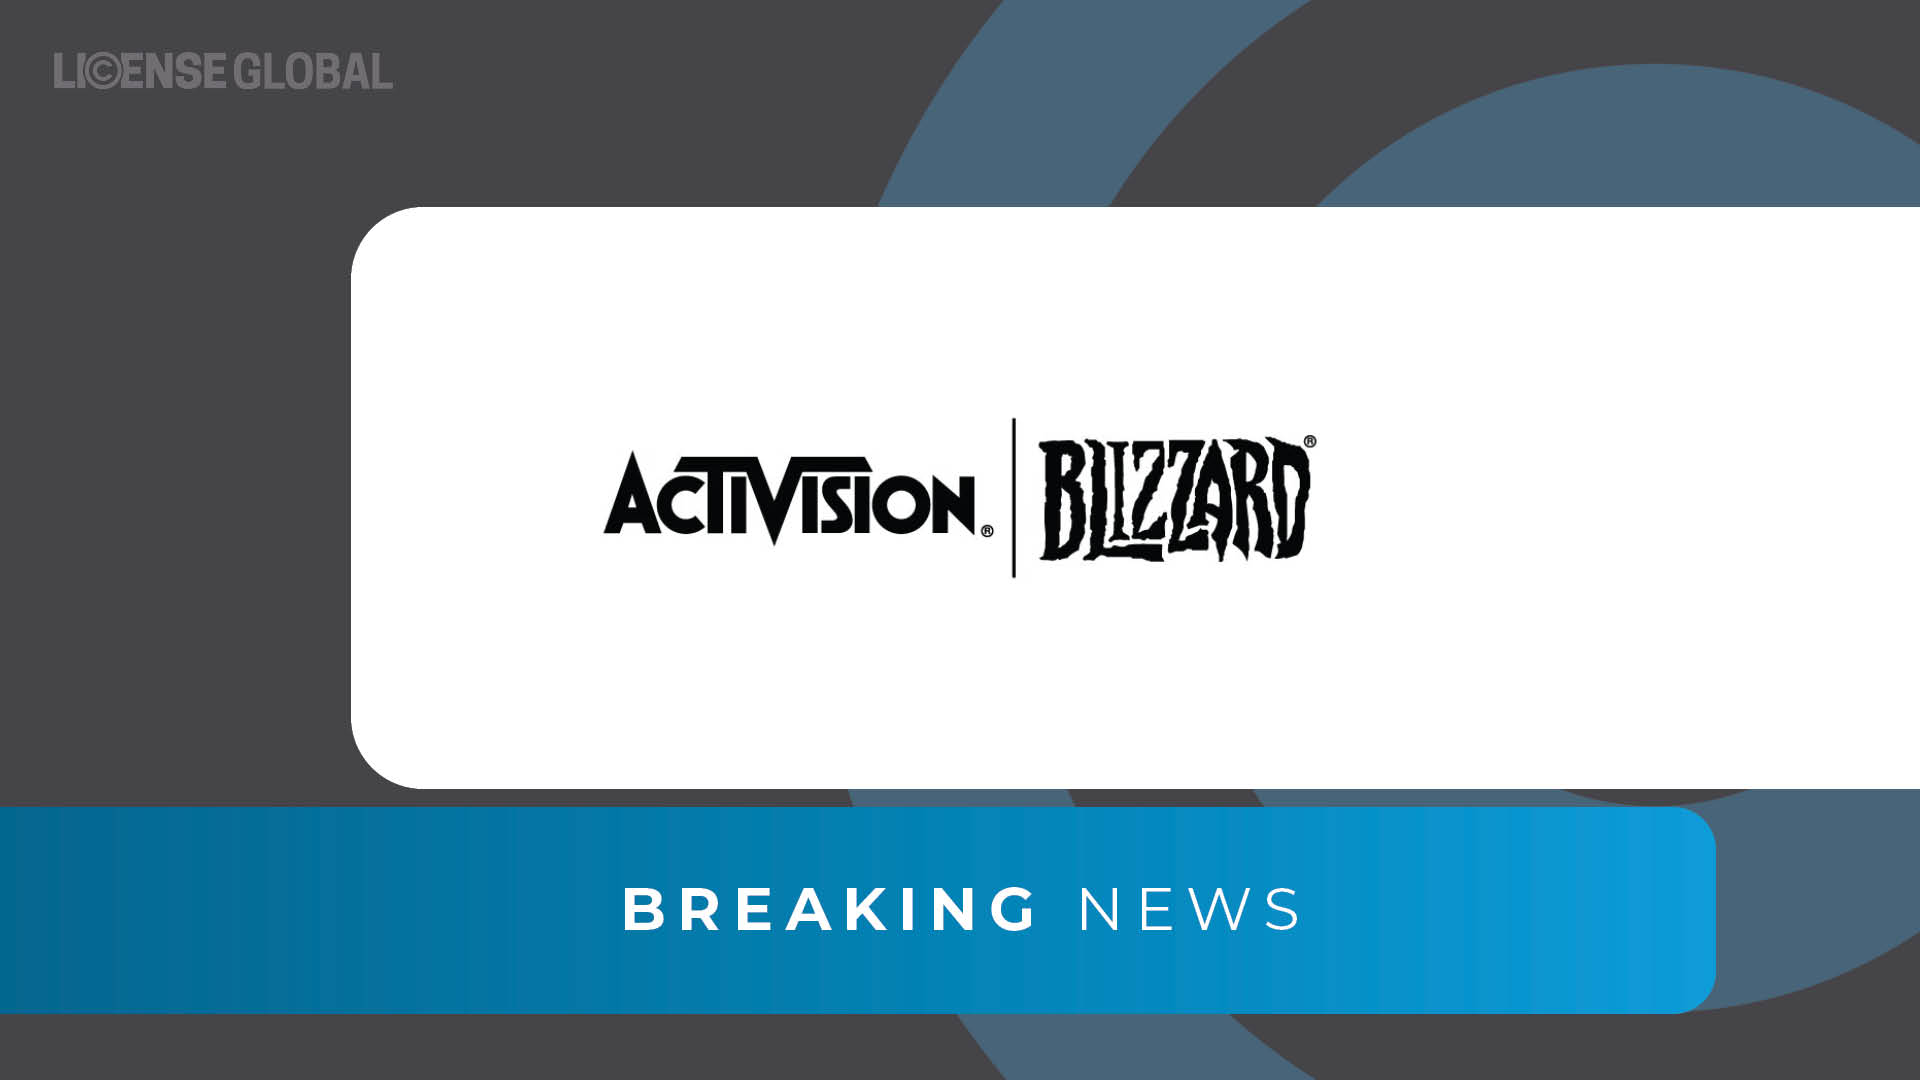 Microsoft's Activision Blizzard acquisition is being blocked by